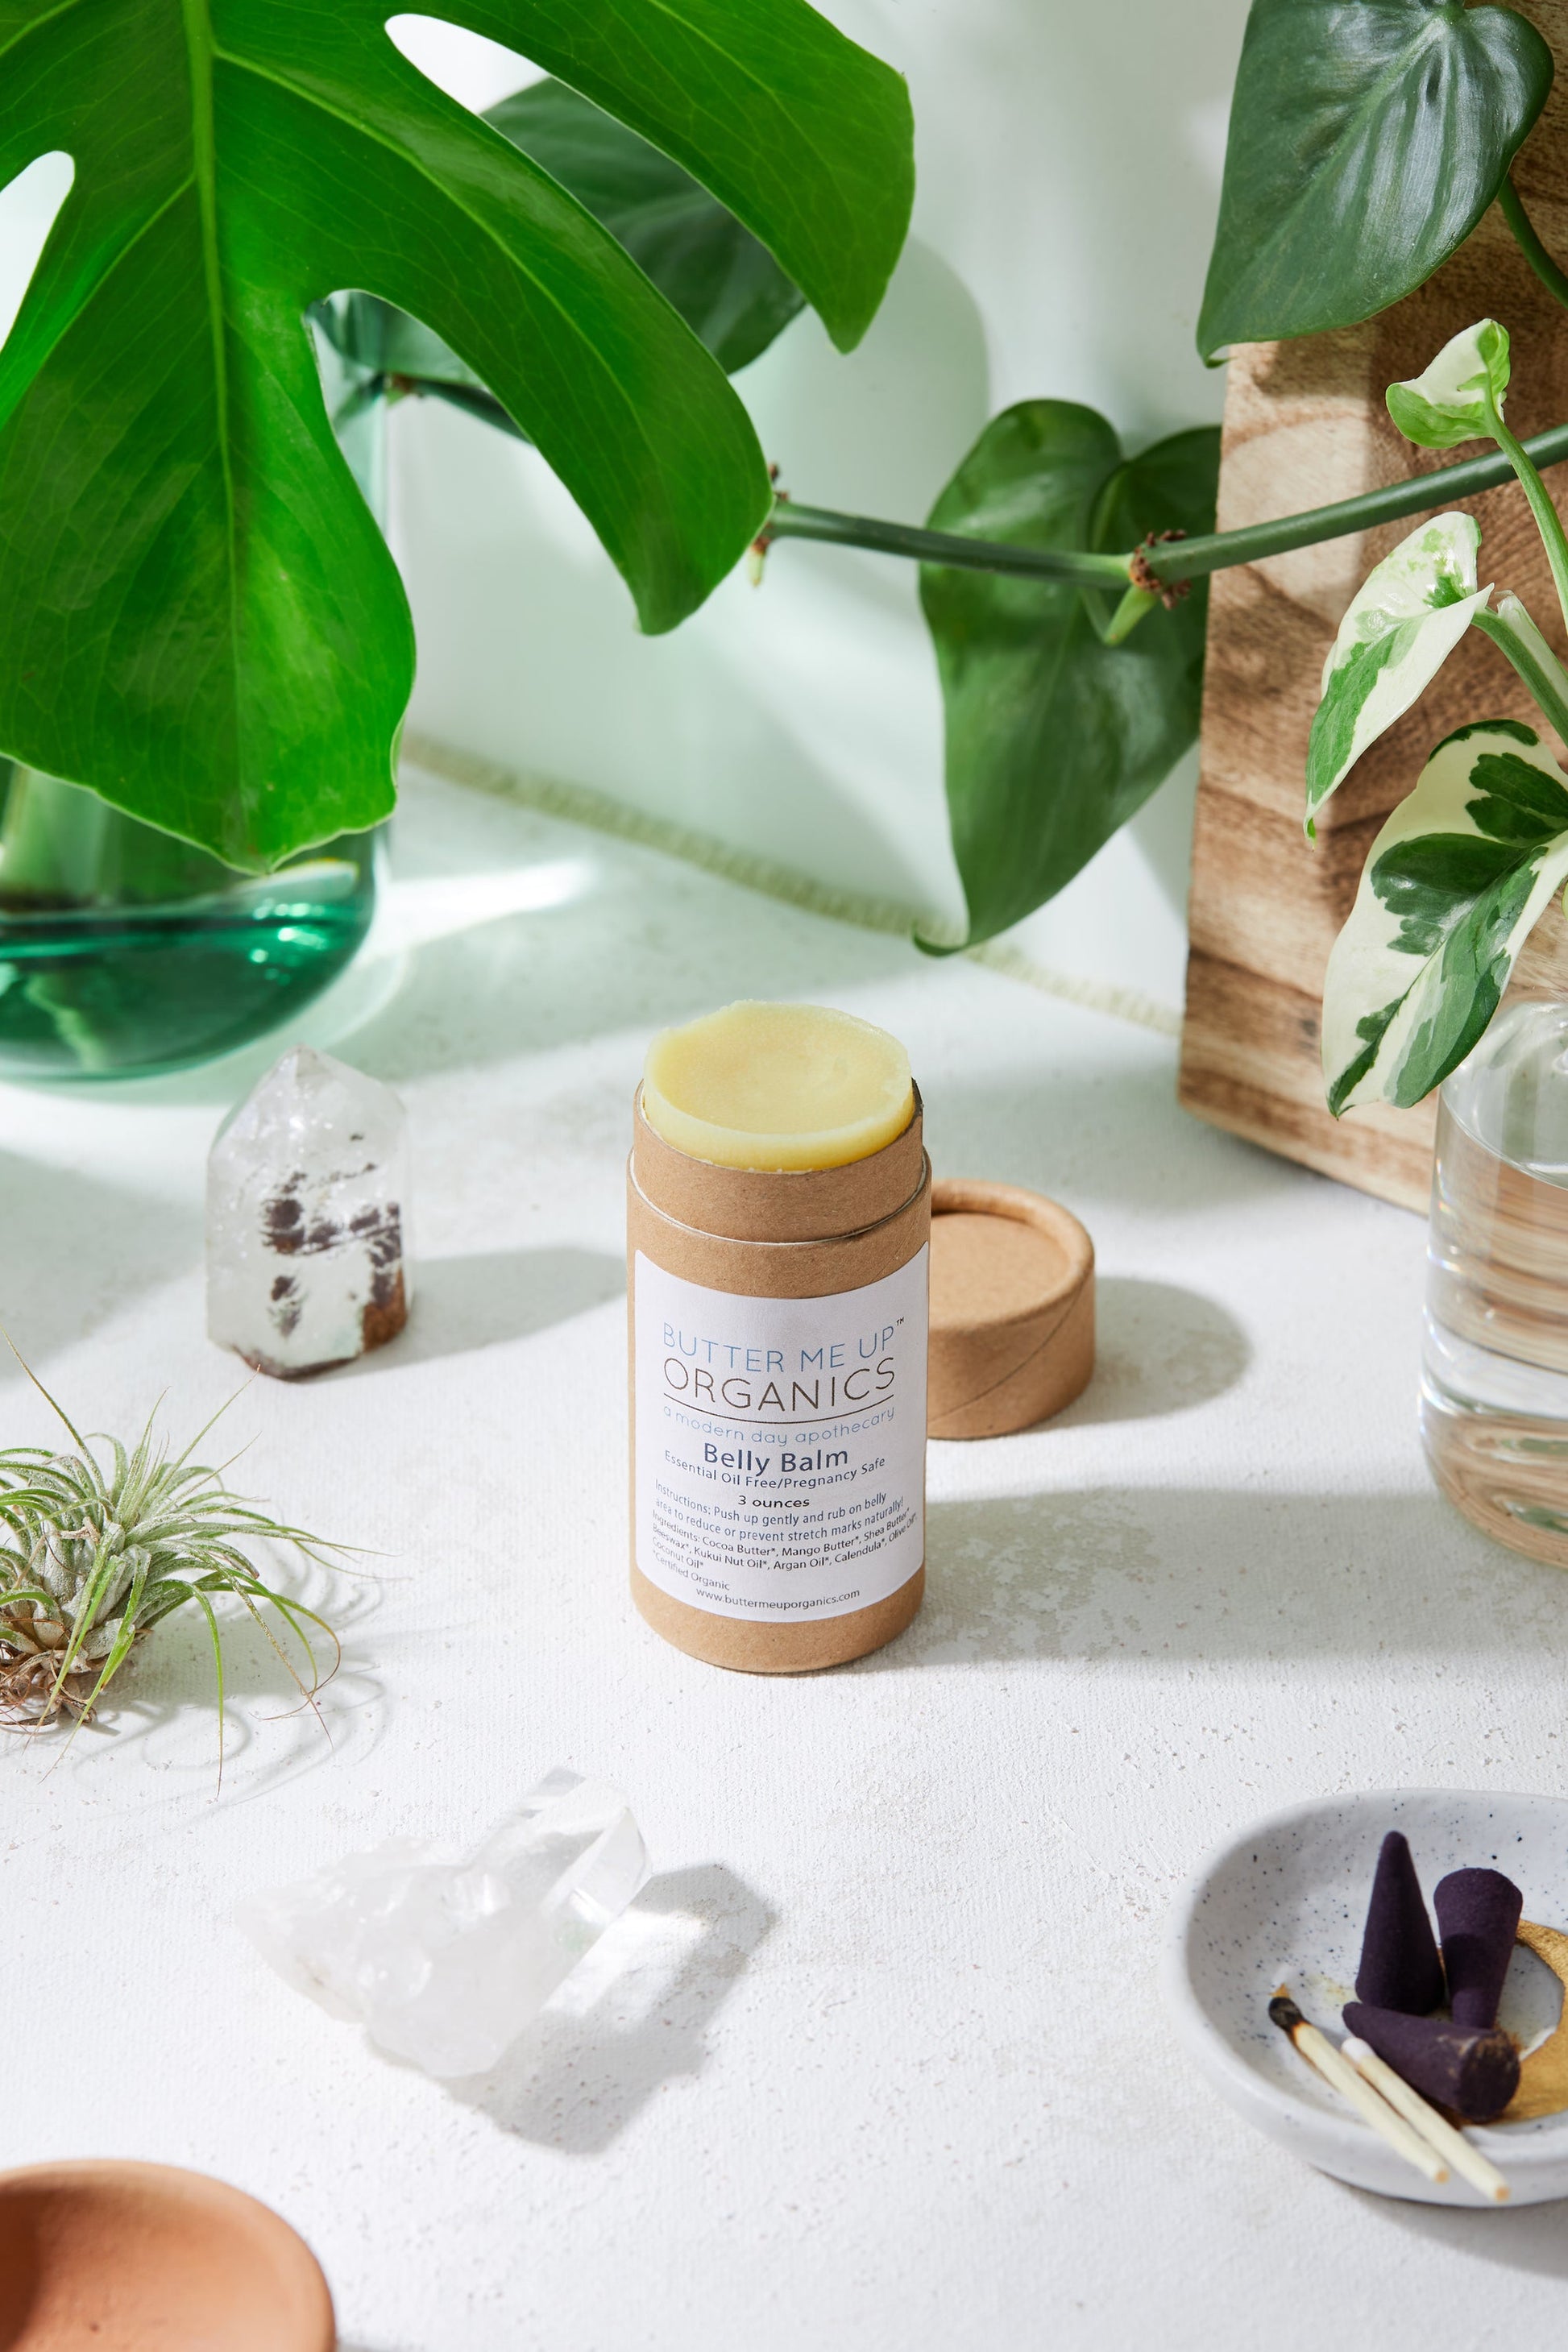 A container of Belly Balm from White Smokey sits on a white surface, surrounded by green plants and small decorative crystals, poised to offer hydrating skin care and stretch mark prevention.